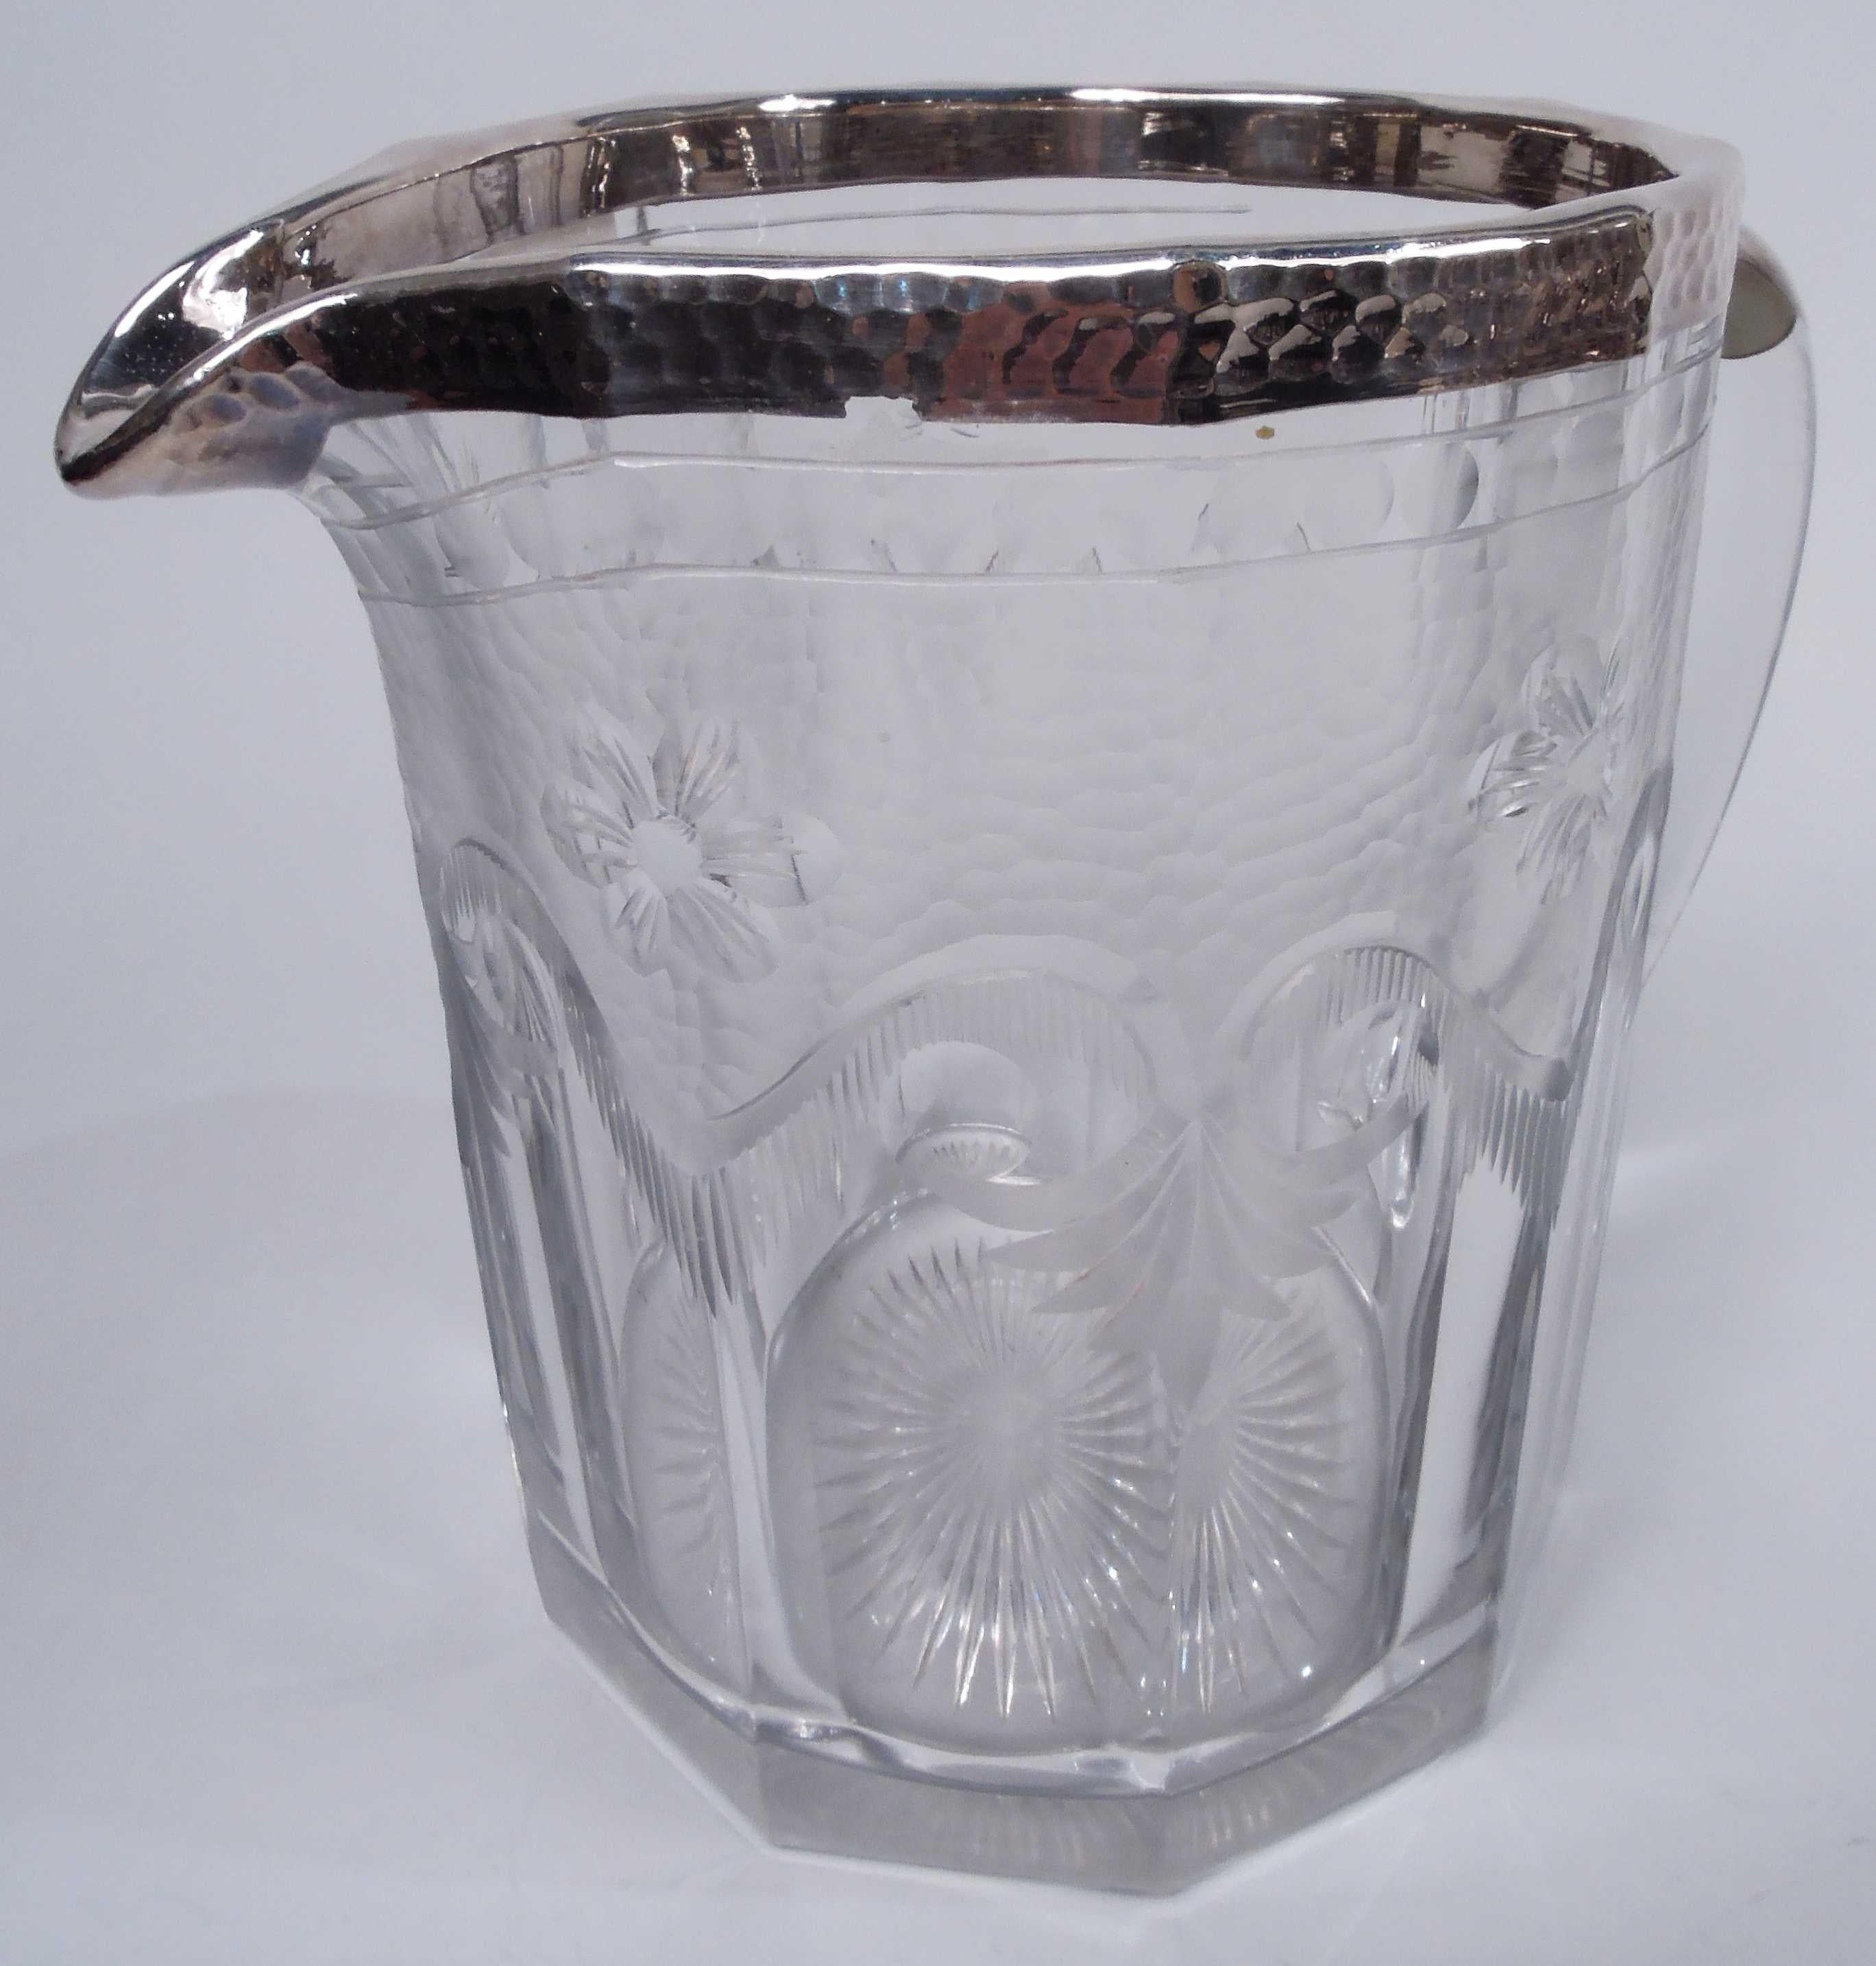 Edwardian Regency glass and silver water pitcher. Made by Heisey in Ohio, ca 1910. Faceted; top half has acid-etched beading, craquelure, and volute-scroll swags with pendant leaves. Mouth and u-spout have hand-hammered silver collar. C-scroll